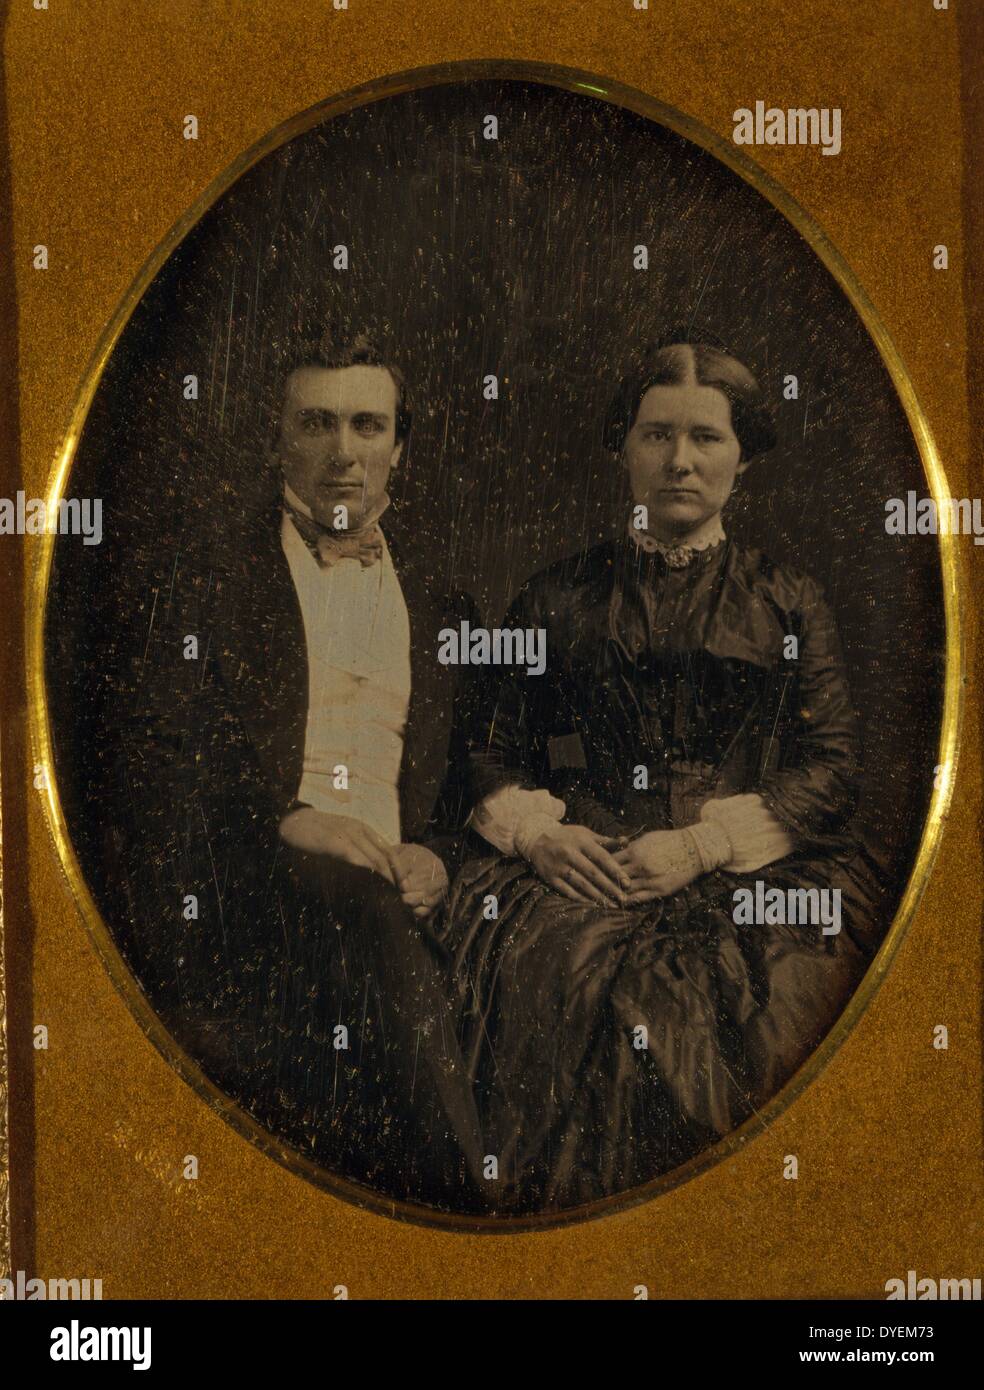 Unidentified man and woman, three-quarters length portrait, seated, by Francis Grice, photographer. 1855: quarter-plate daguerreotype. Stock Photo